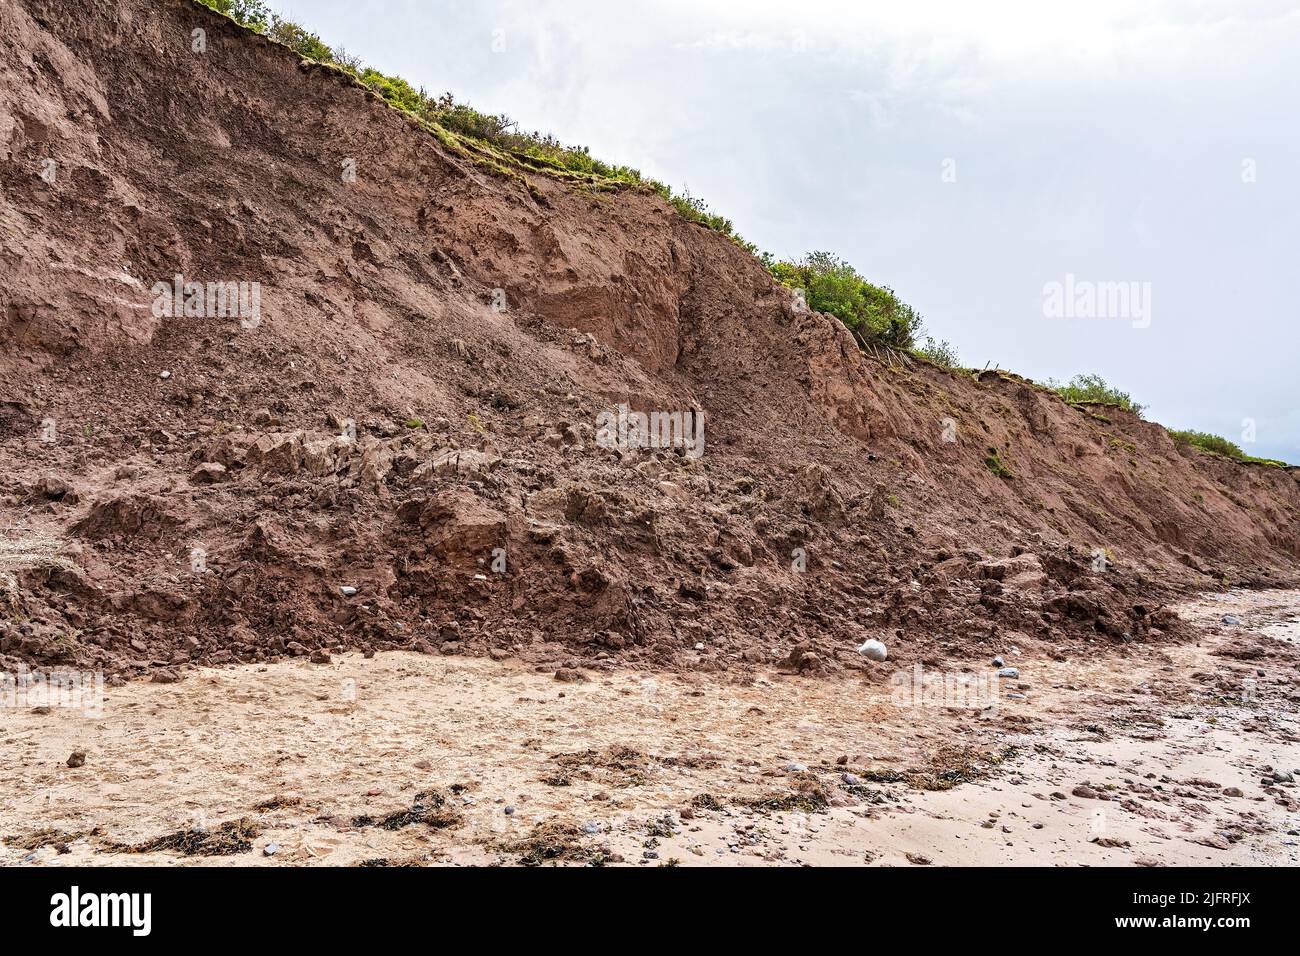 Thurstaston cliffs showing erosion after long period of heavy rain and tidal erosion from below causing collapse and mud slides River Dee Estuary UK Stock Photo